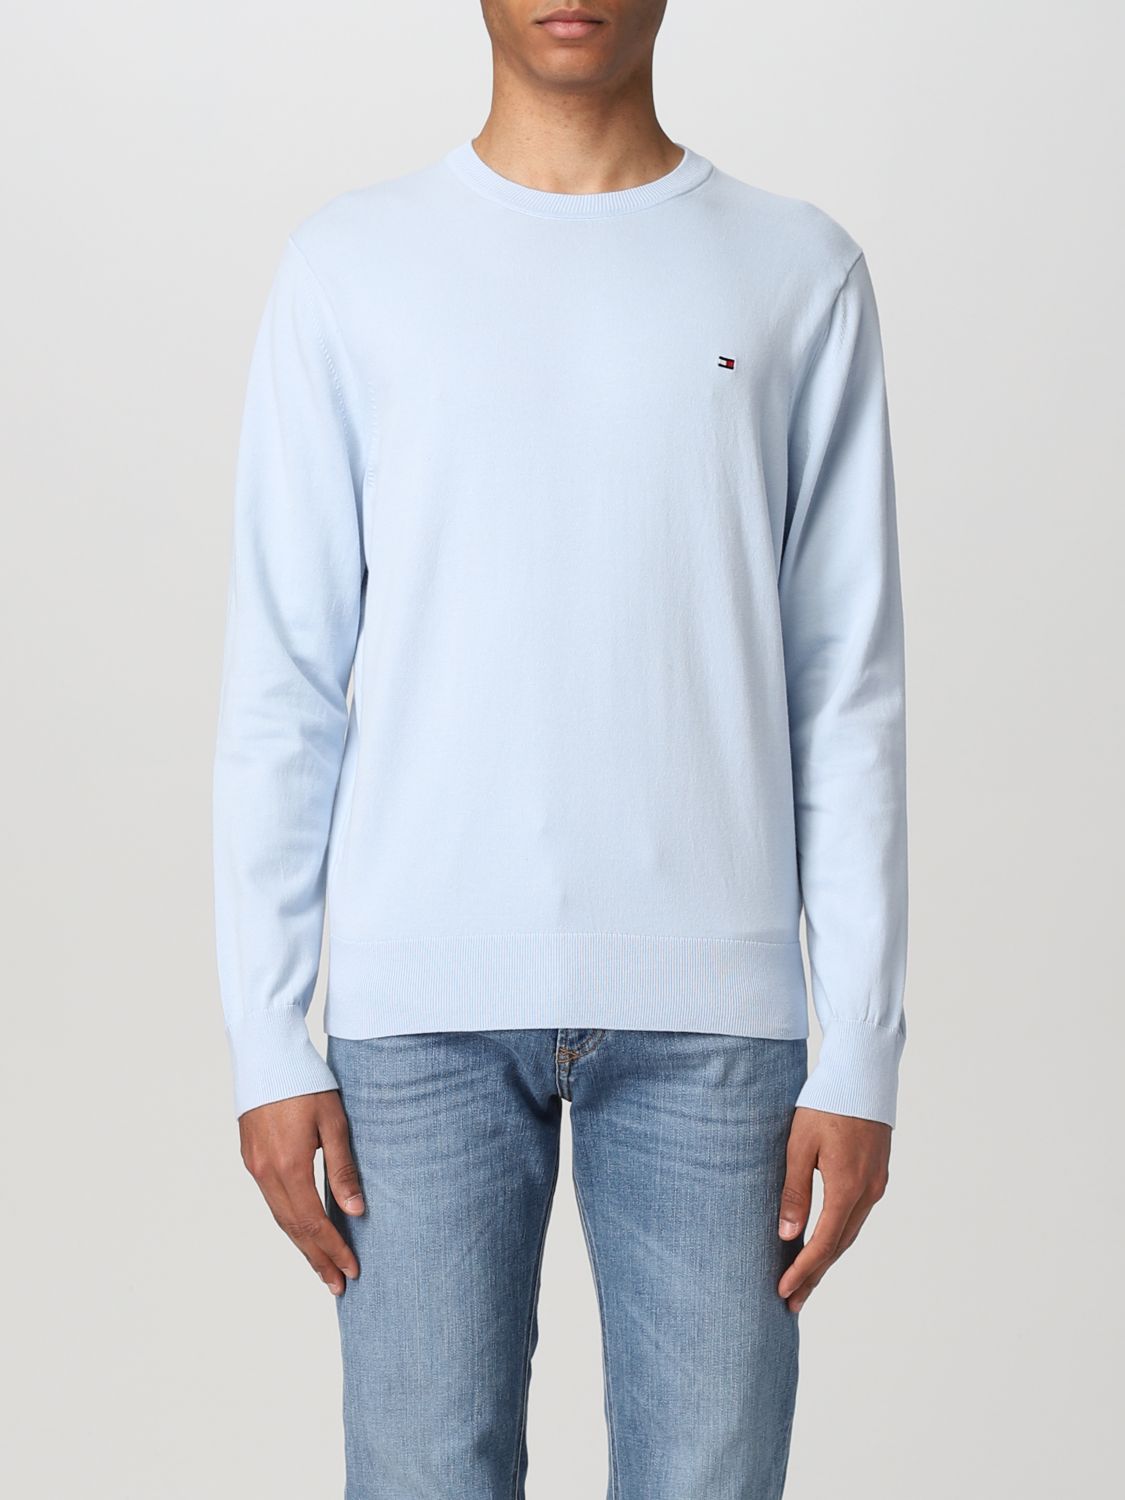 Tommy Hilfiger Outlet: sweater - Blue | Tommy Hilfiger sweater MW0MW21316 online on GIGLIO.COM